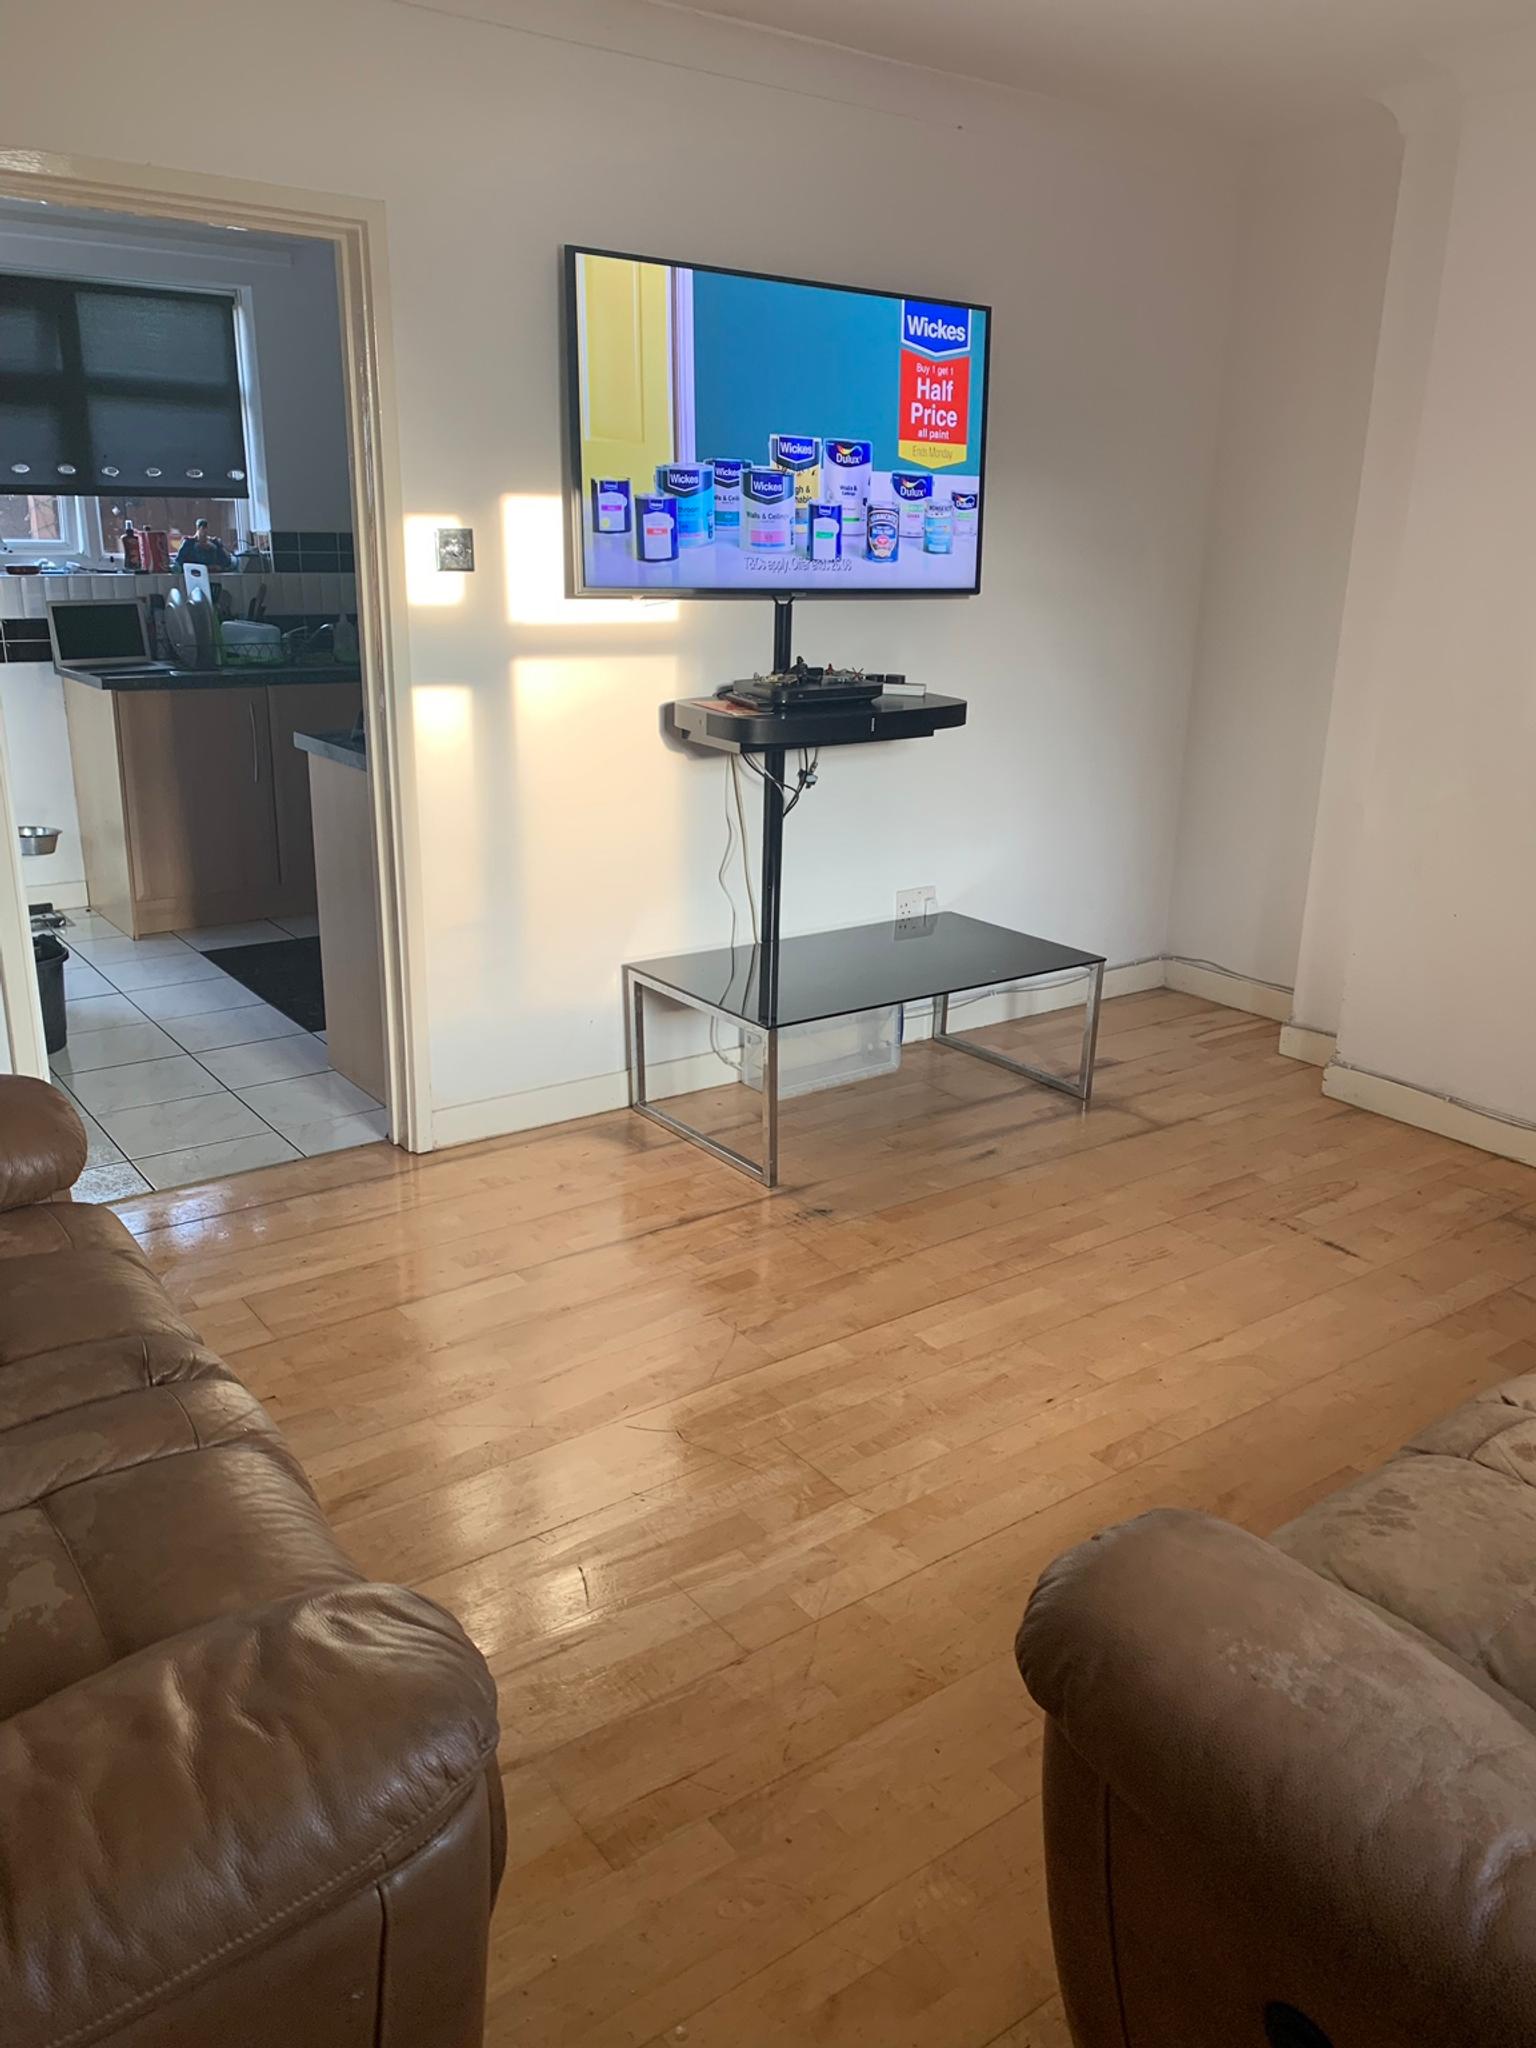 1 Large Single Room In Nr1 Norwich For 380 00 For Sale Shpock